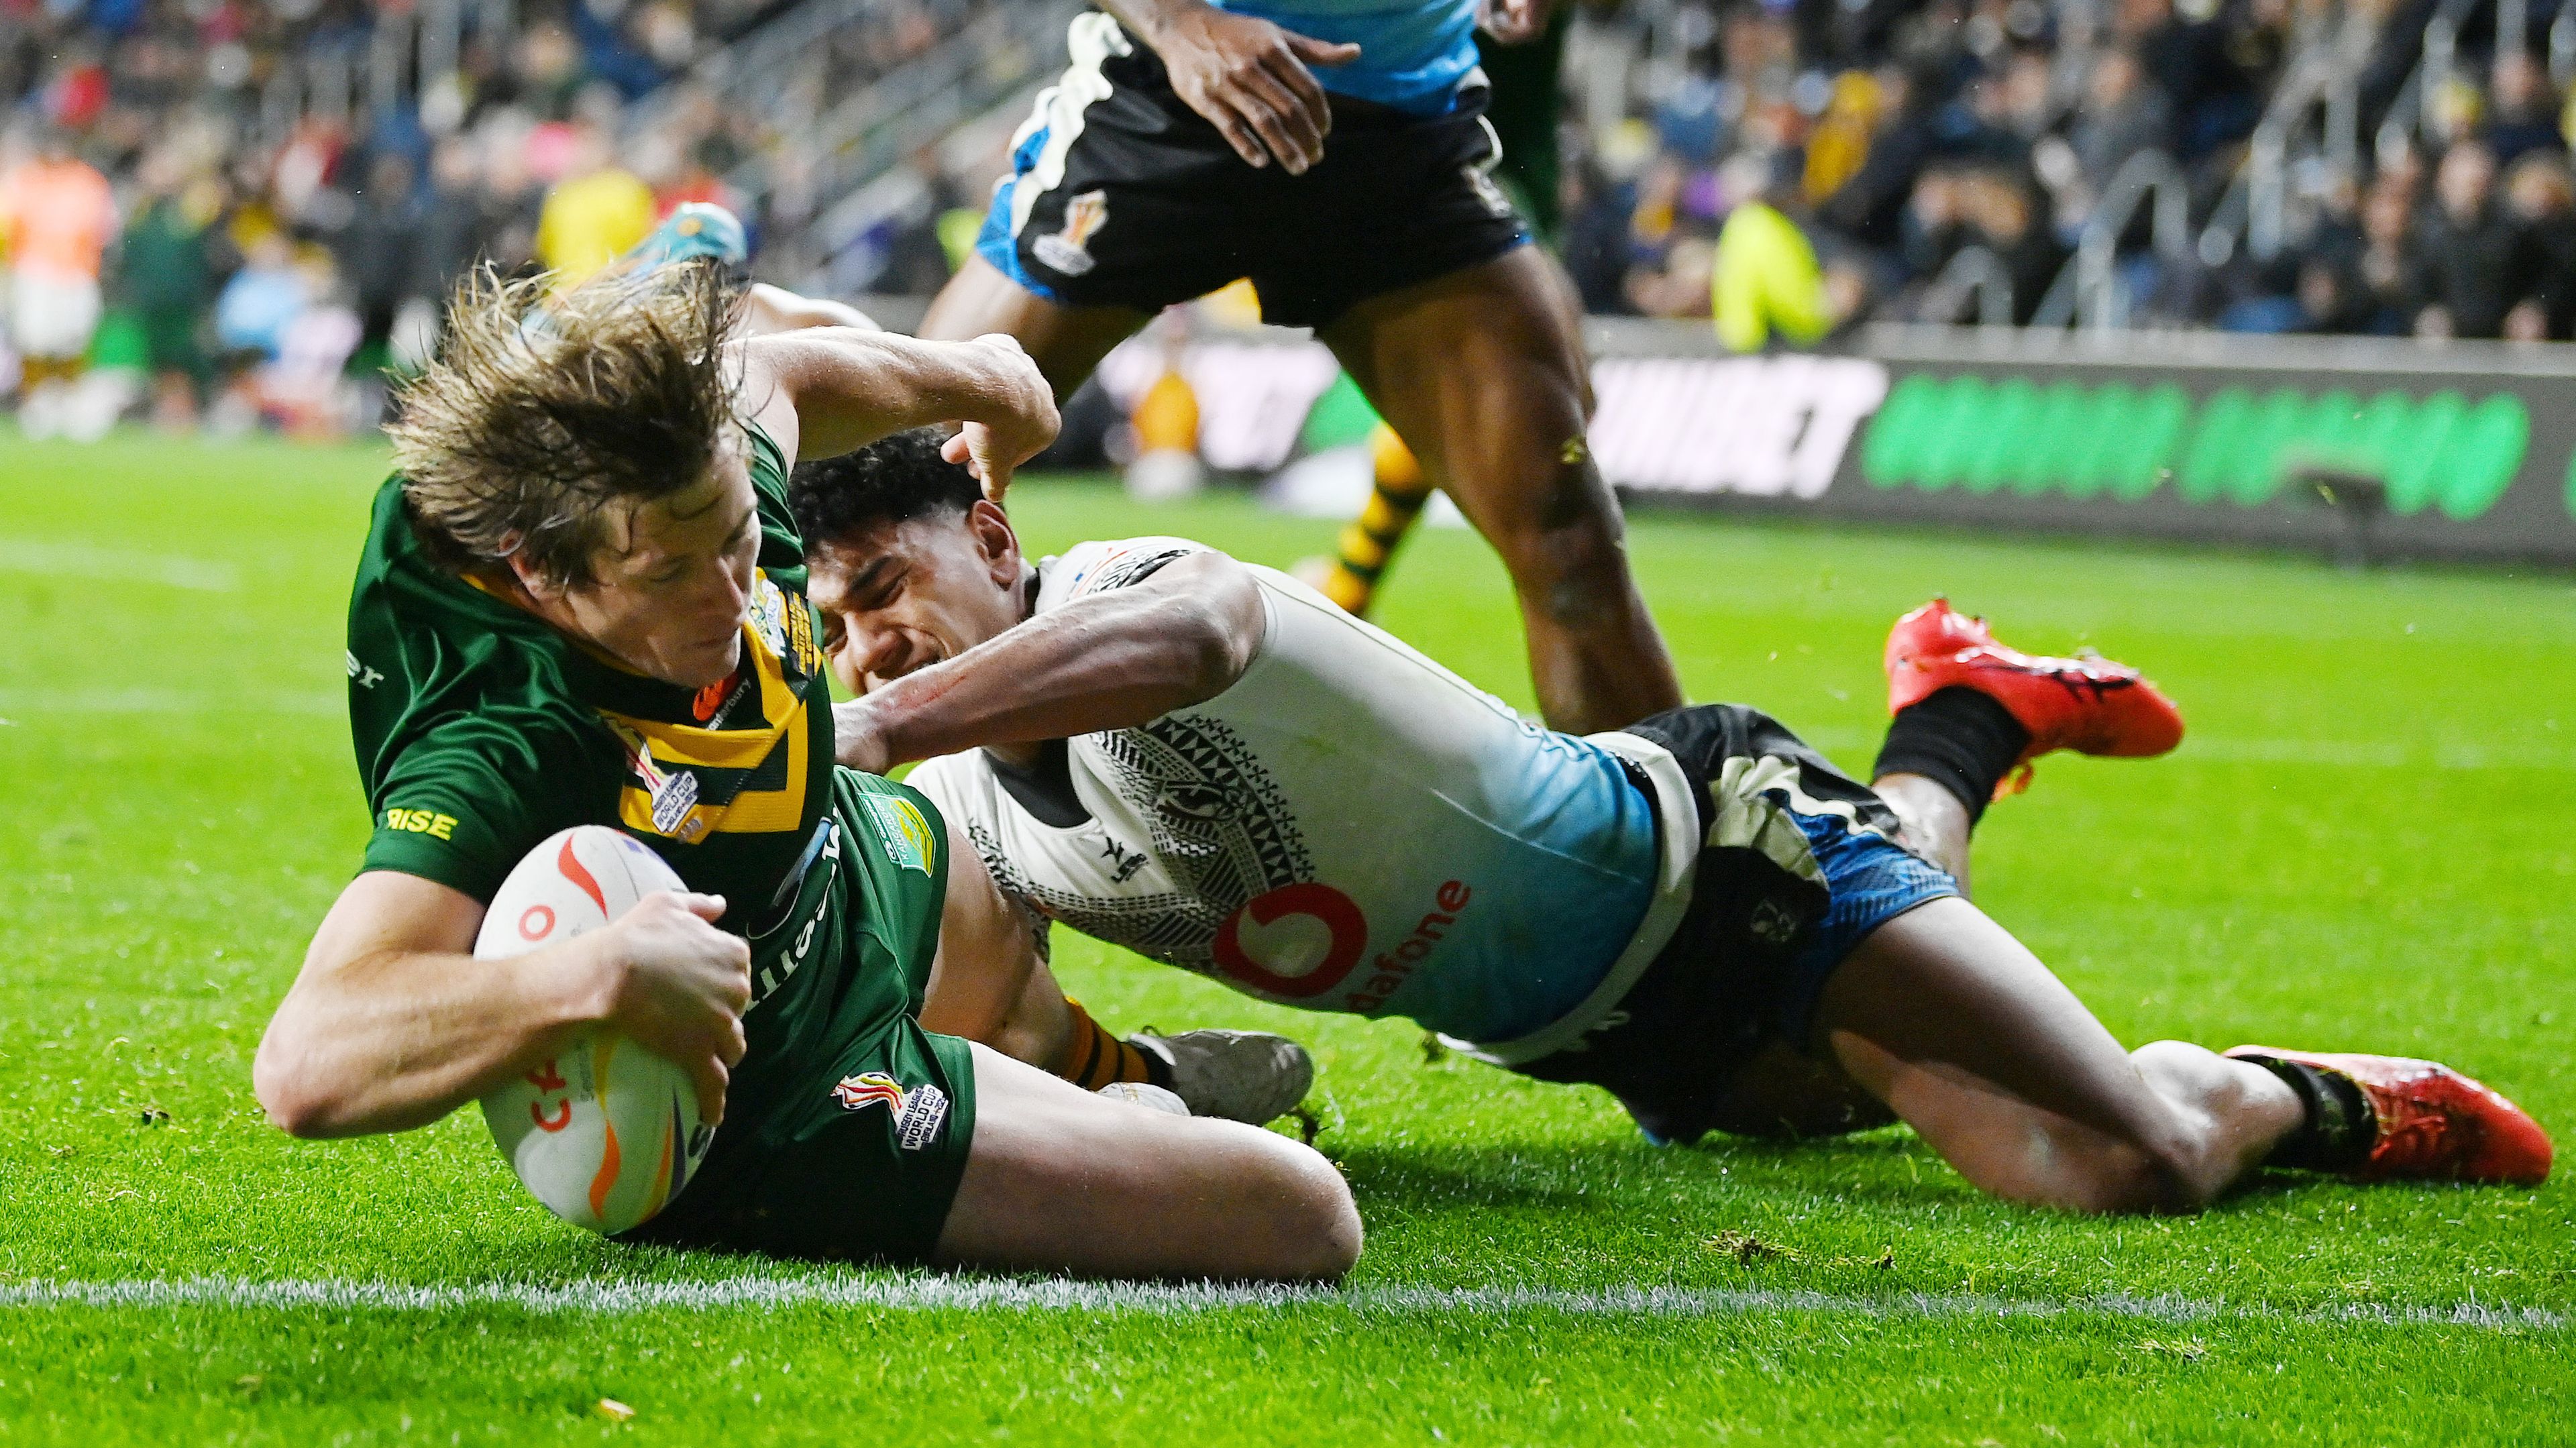 Harry Grant of Australia touches down for their side&#x27;s fifth try during the Rugby League World Cup 2021 Pool B match between Australia and Fiji at Headingley on October 15, 2022 in Leeds, England. (Photo by Gareth Copley/Getty Images)